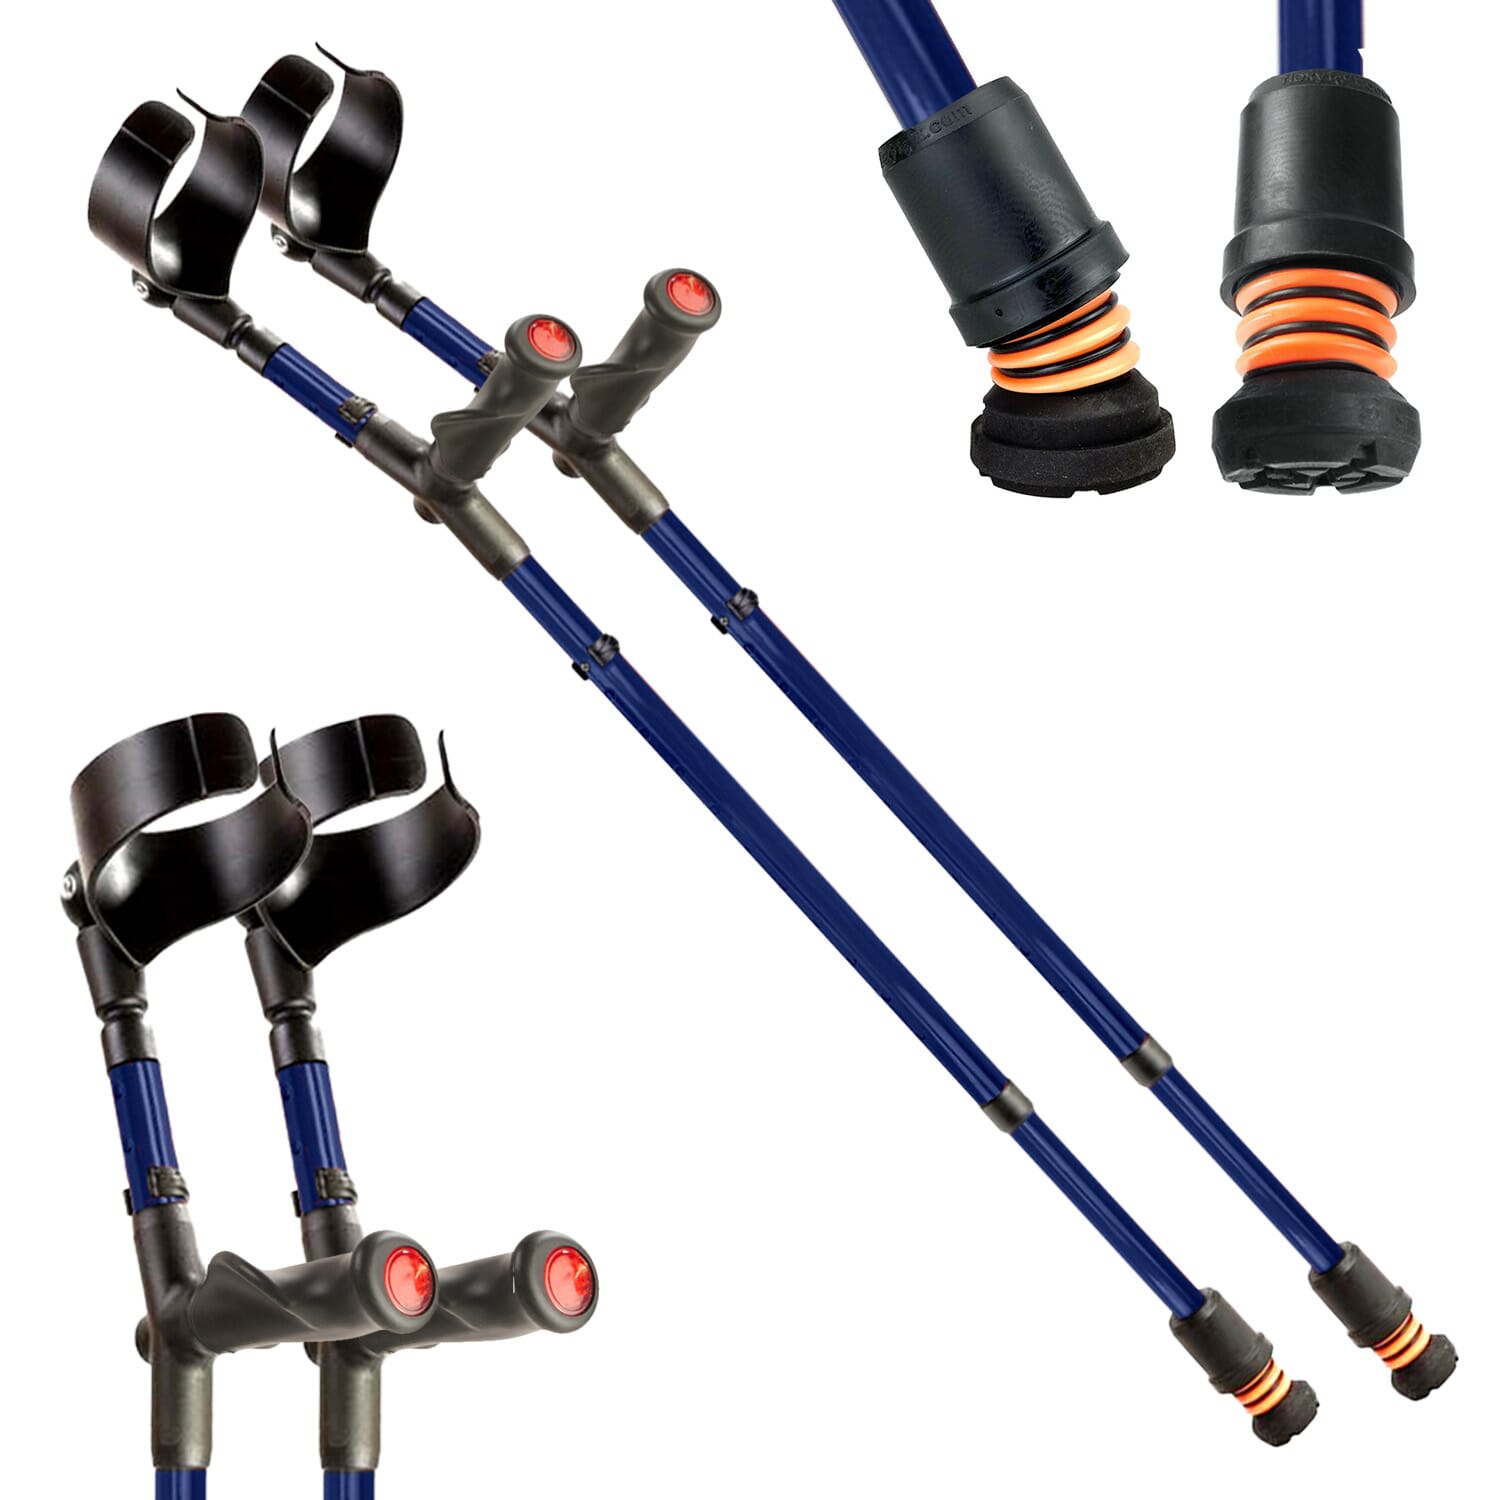 View Flexyfoot Comfort Grip Double Adjustable Crutches Blue Pair information